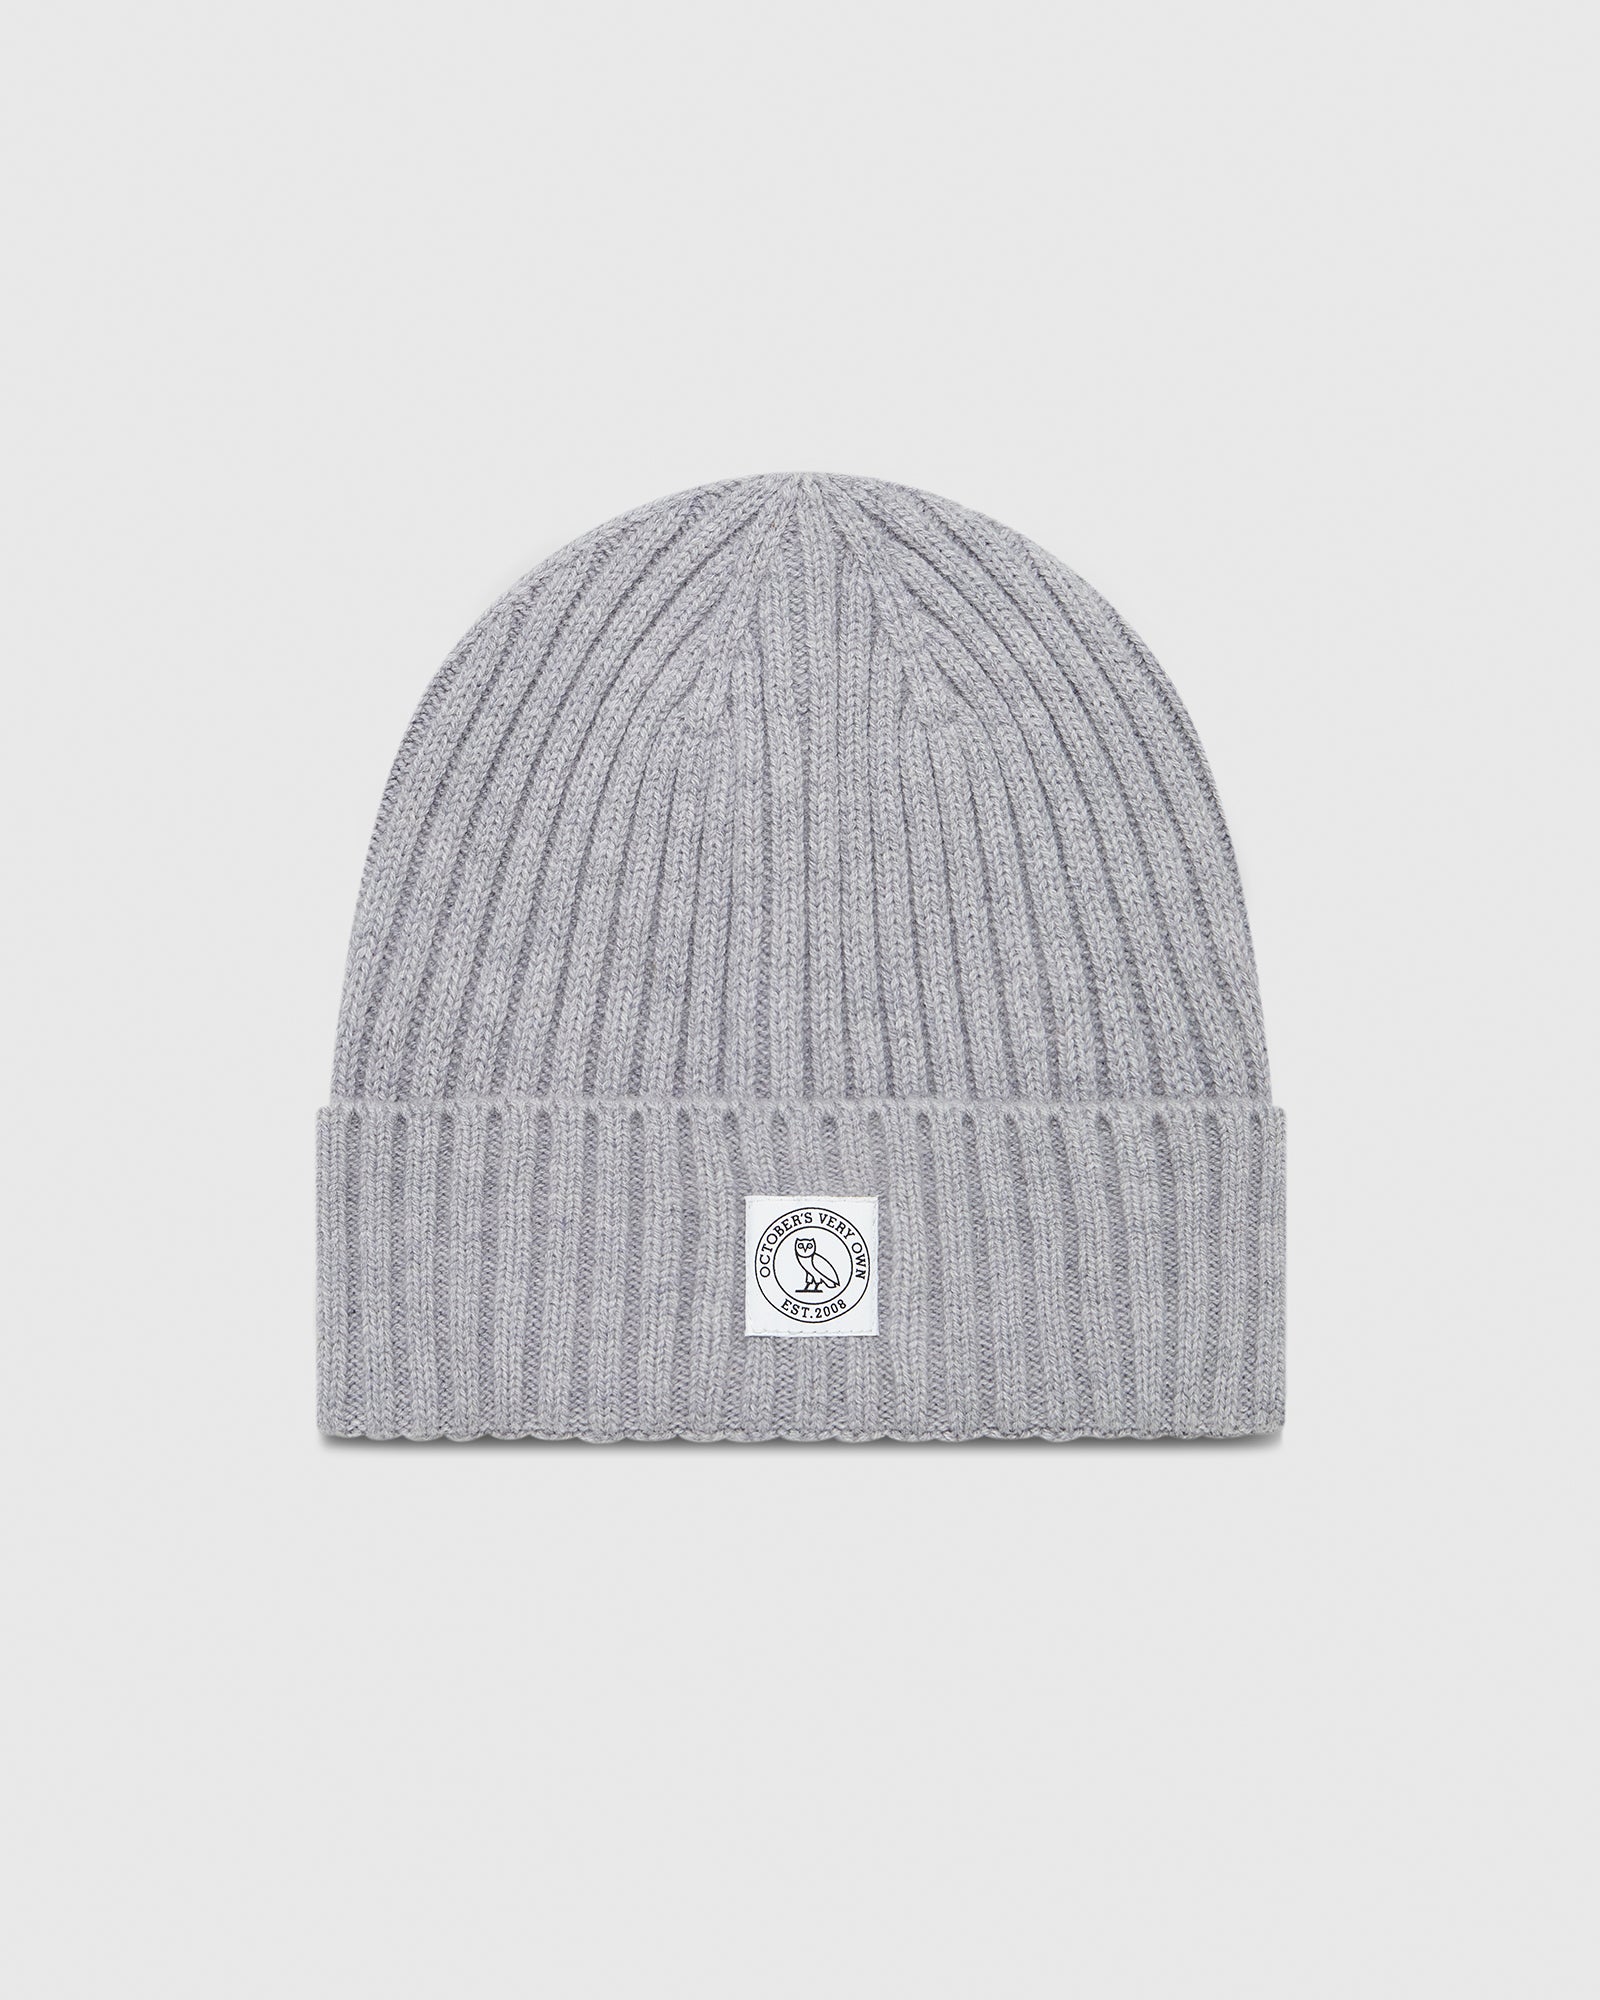 Knit Beanie - Heather Grey - October's Very Own